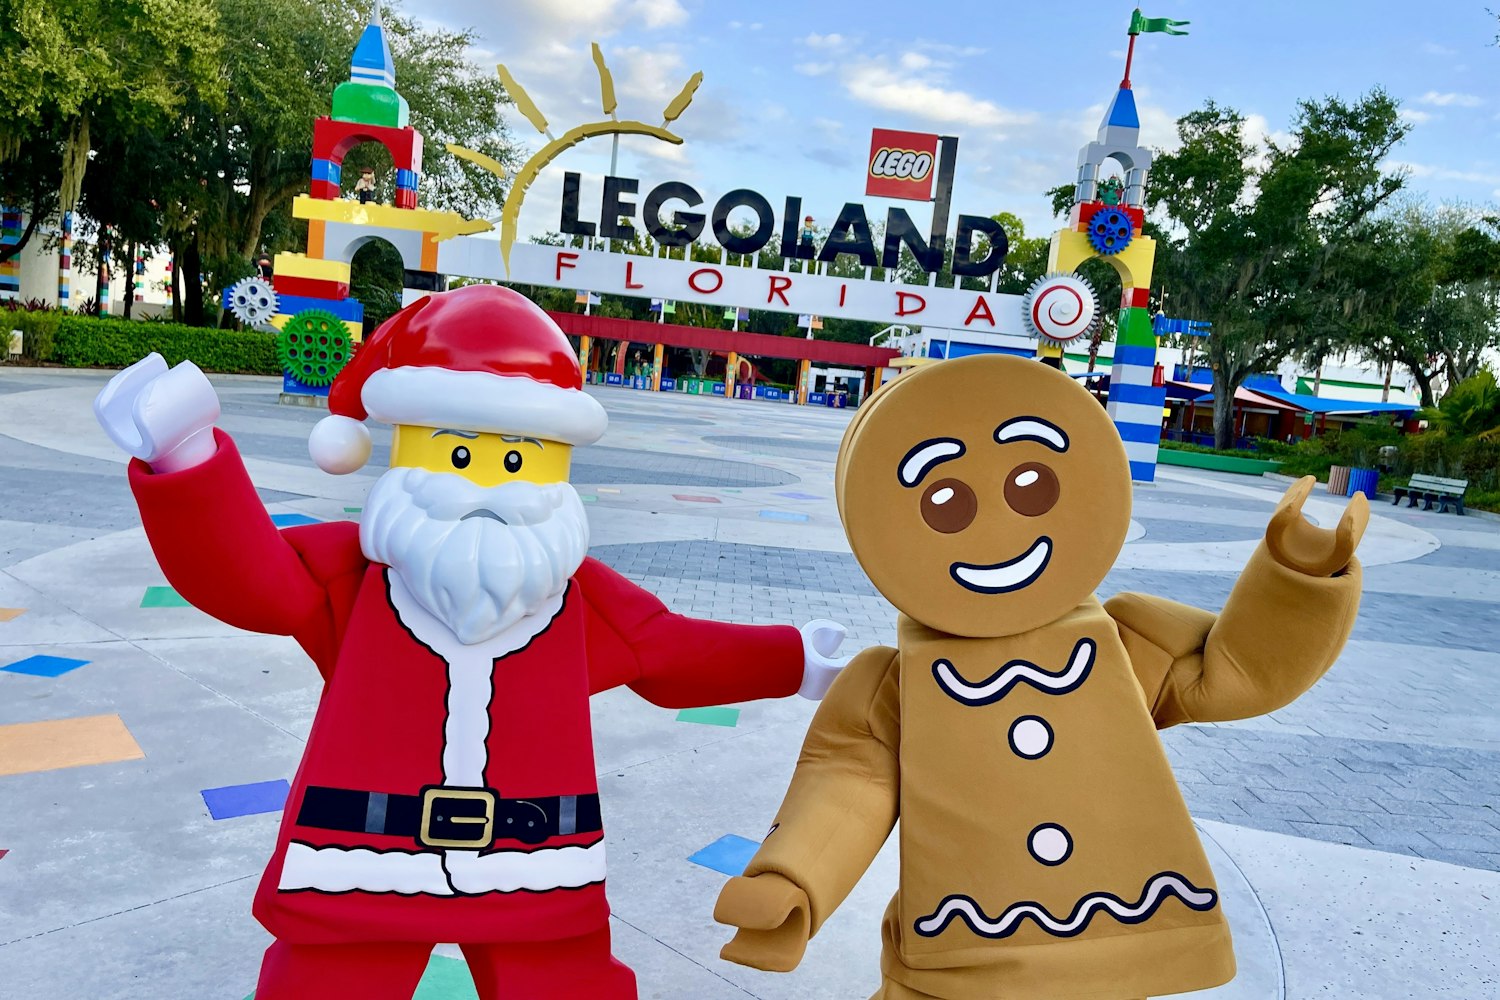 Cover Image for The Holidays Arrive at LEGOLAND Florida Resort